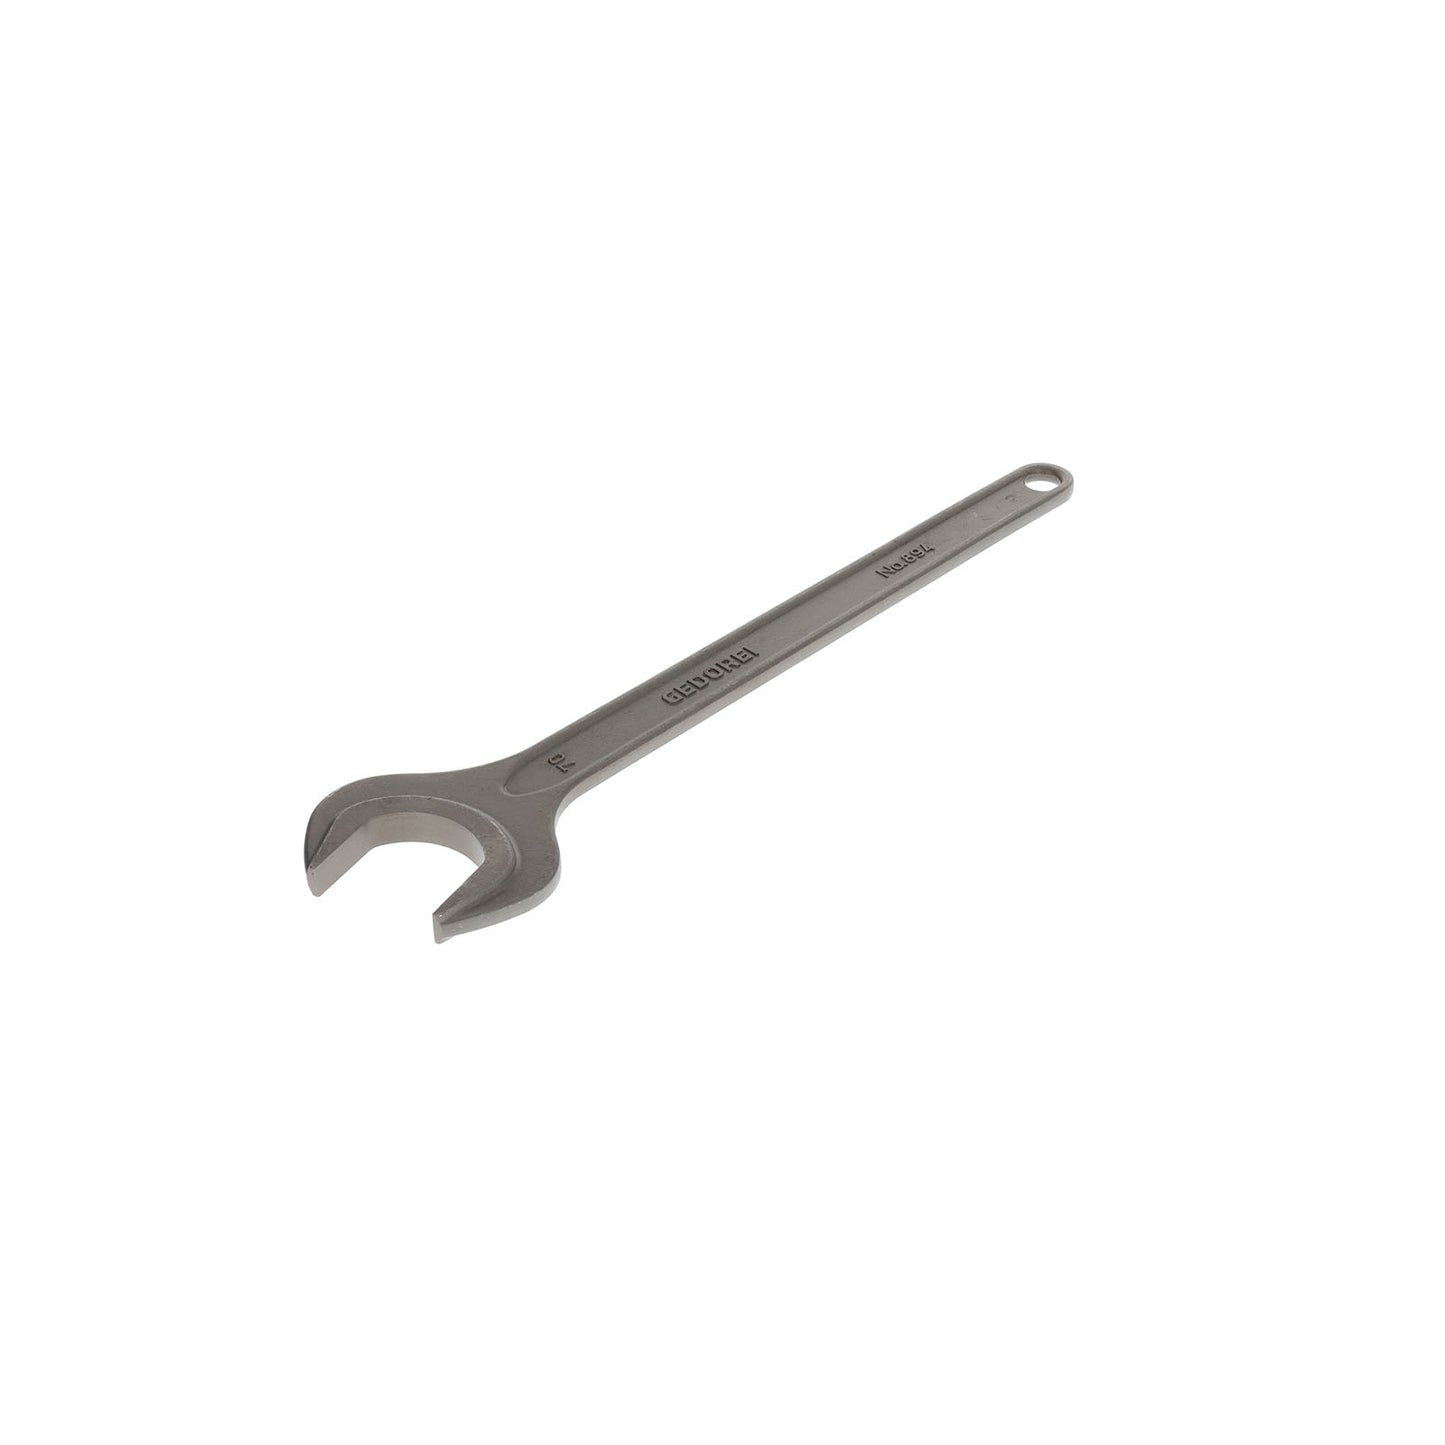 GEDORE 894 70 - 1 Open End Wrench, 70mm (6577510)